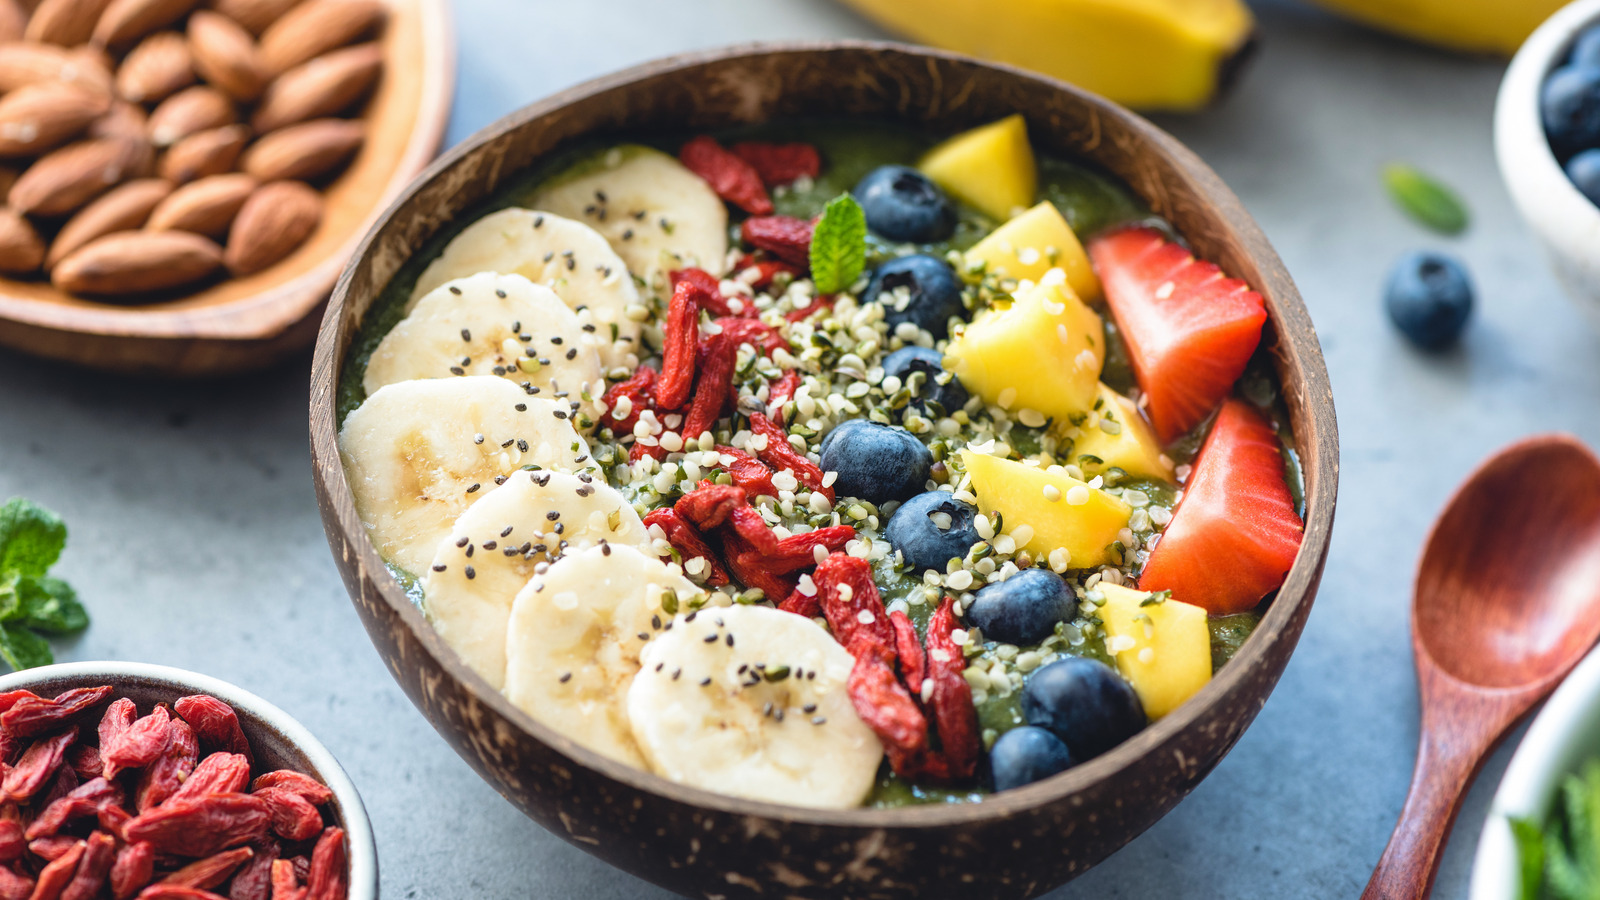 Are Smoothie Bowls Actually Good For You?